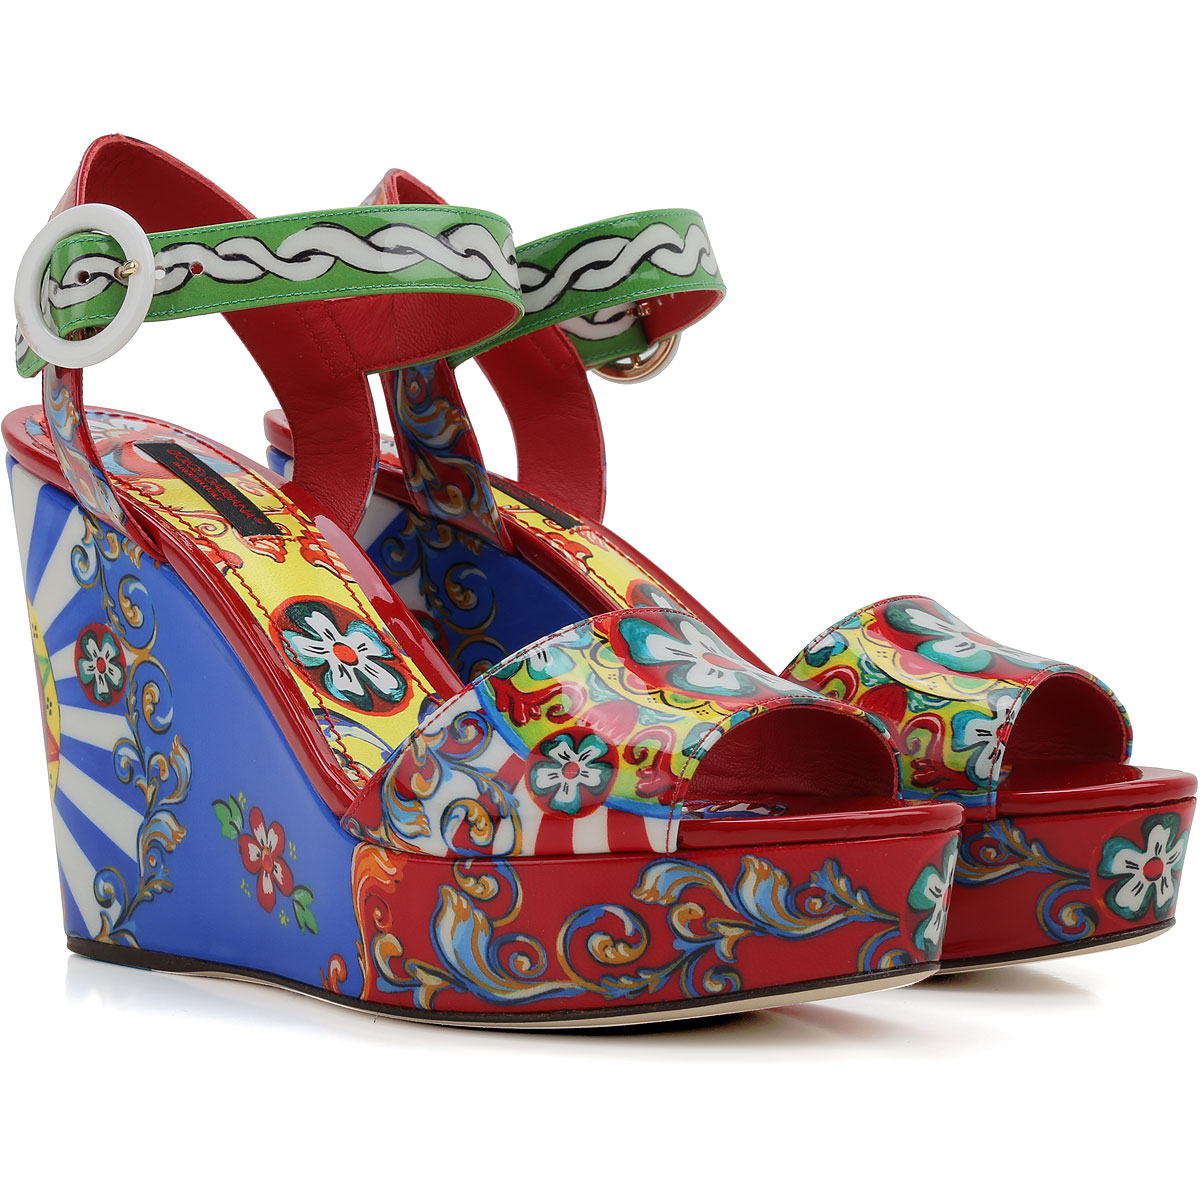 Womens Shoes Dolce And Gabbana Style Code Cz0074 Ab044 8s643 5532